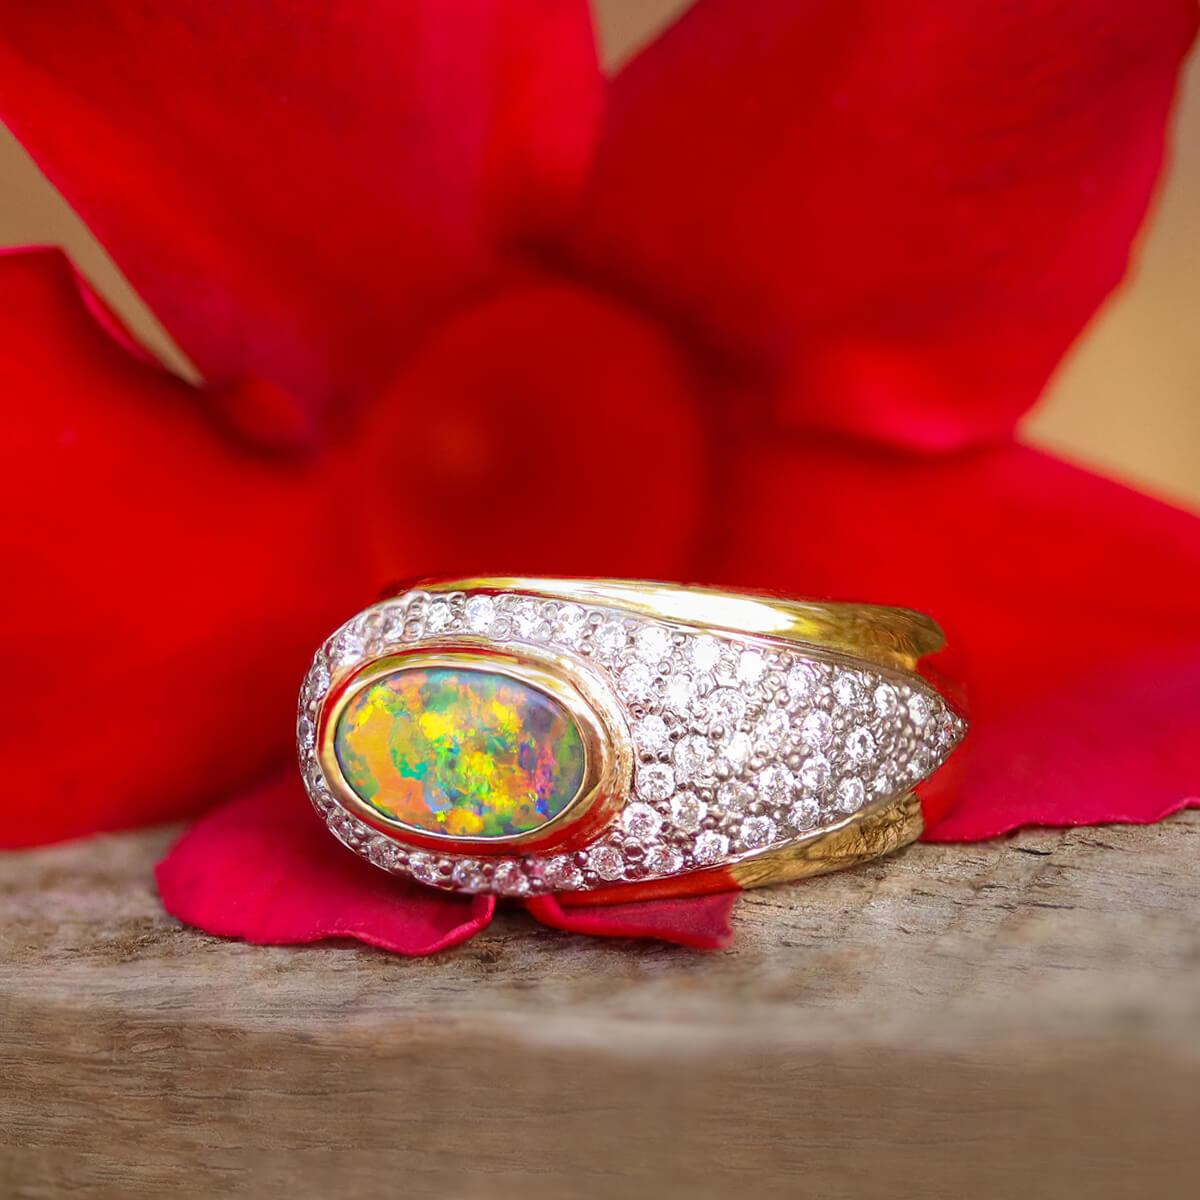 Elegant and sophisticated, this stunning solid 18K yellow and white gold ring features a mystical solid Australian Black Opal with shimmering orange, yellow, blues and greens that take you into its depths and hold your imagination in awe. 

The